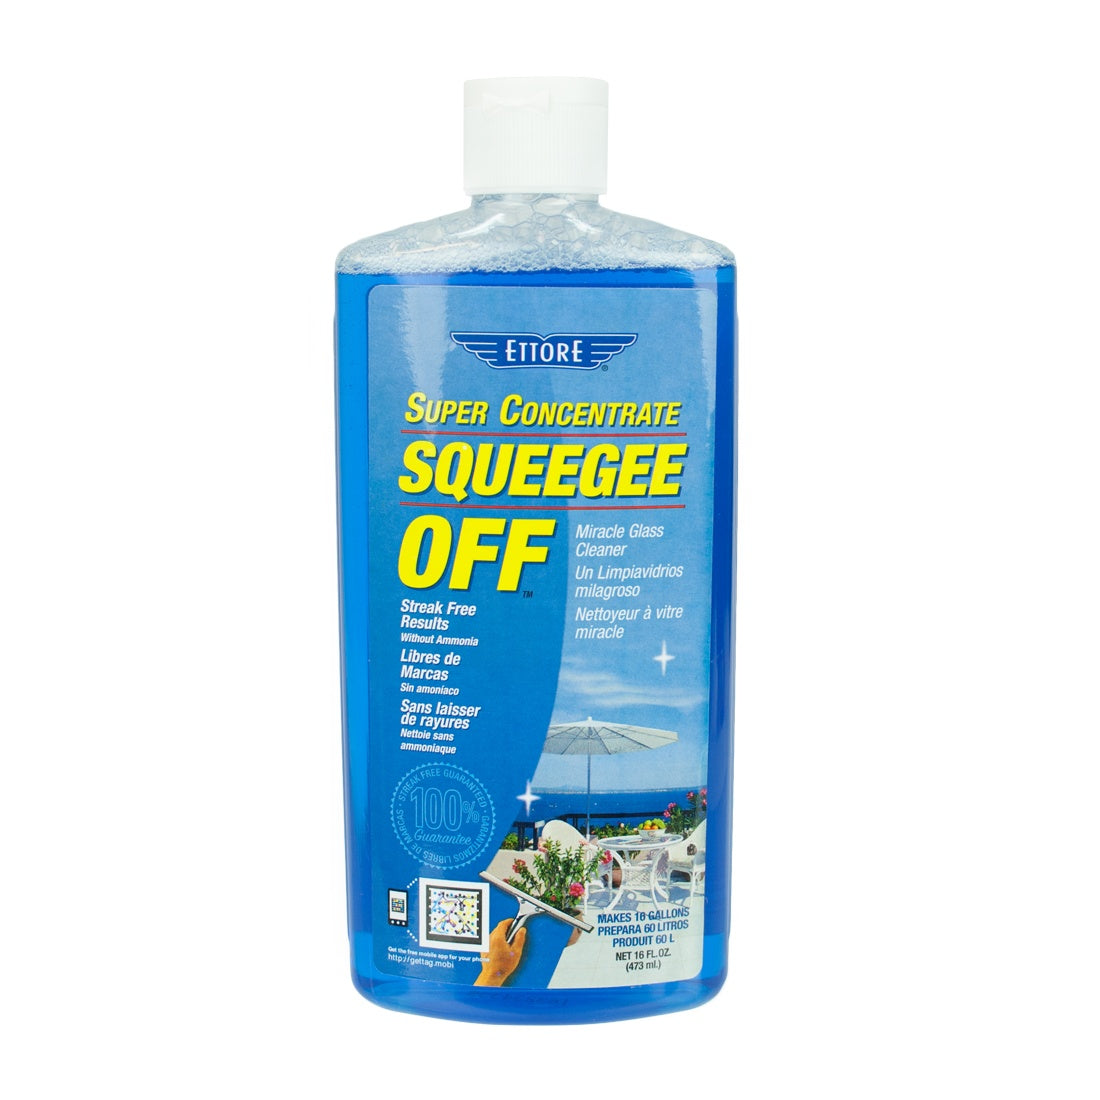 Ettore Squeegee-Off Soap Full View